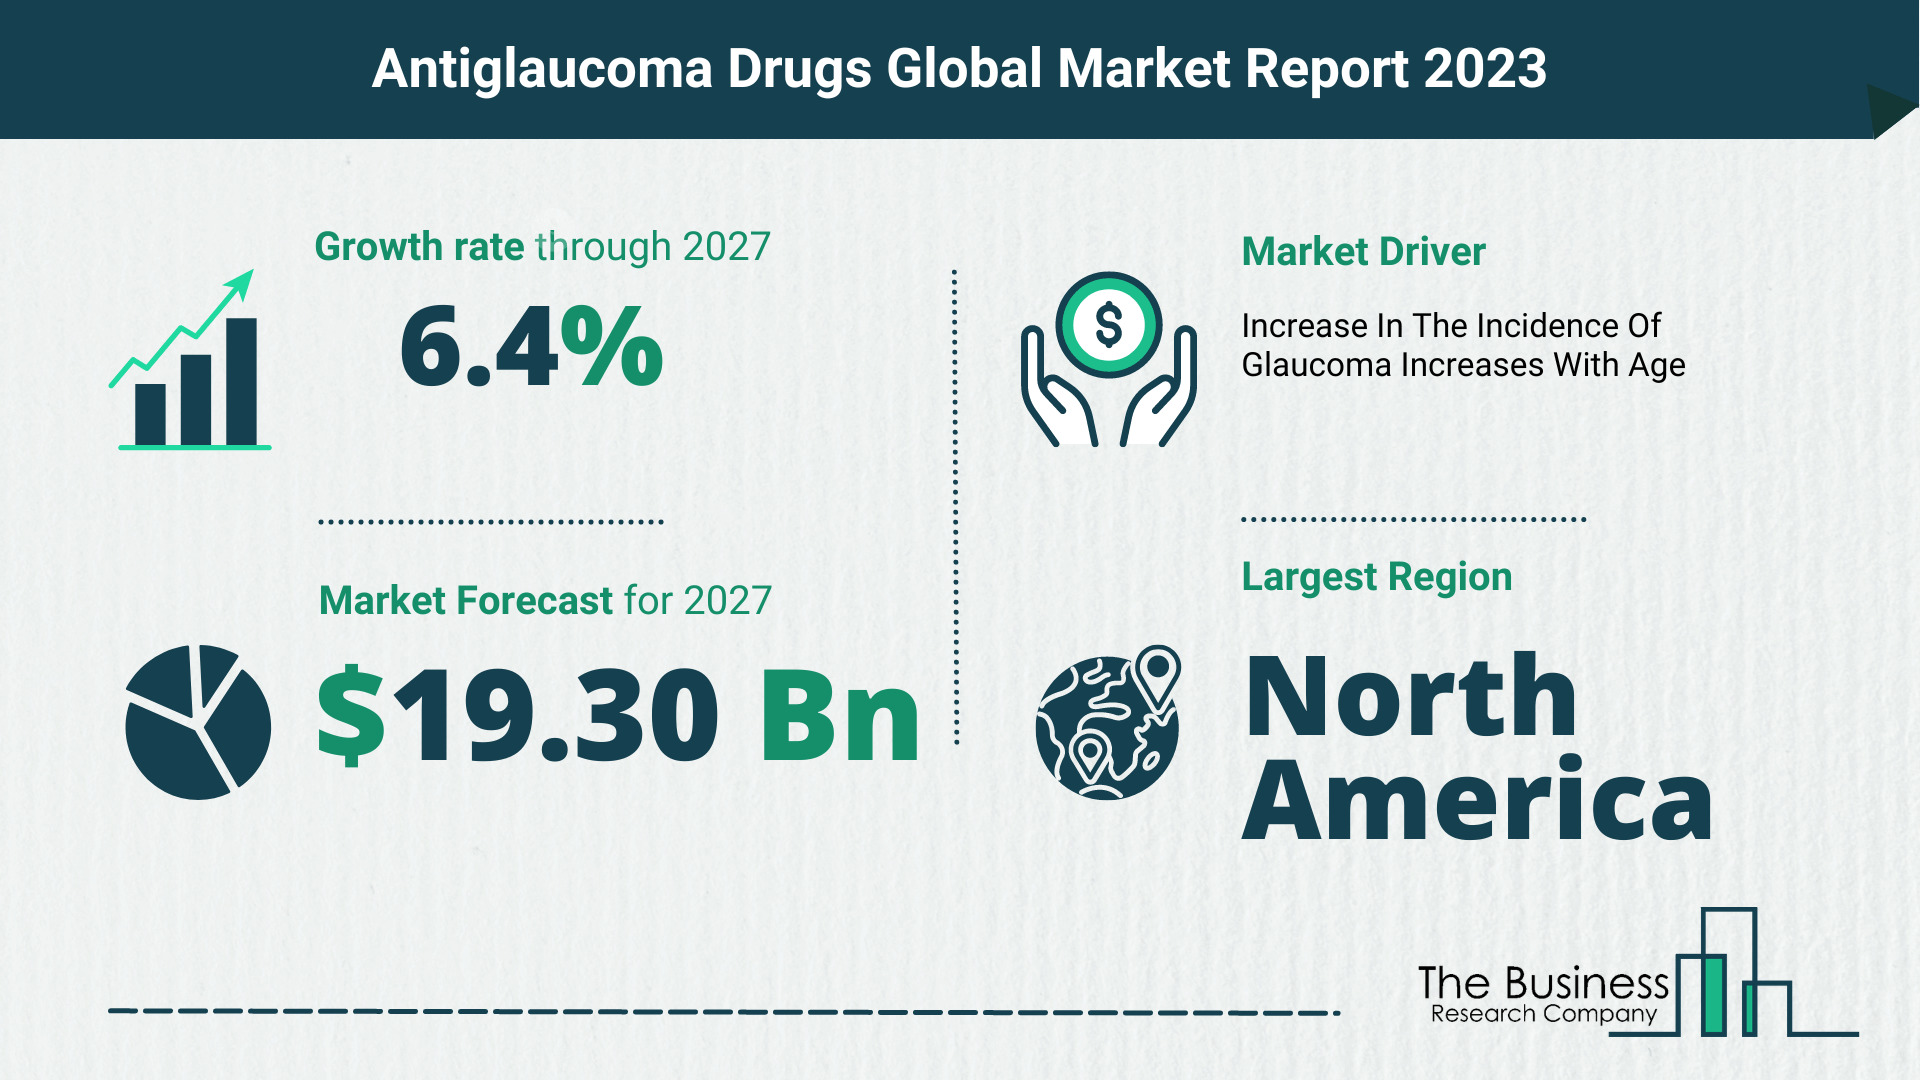 What Will The Antiglaucoma Drugs Market Look Like In 2023?